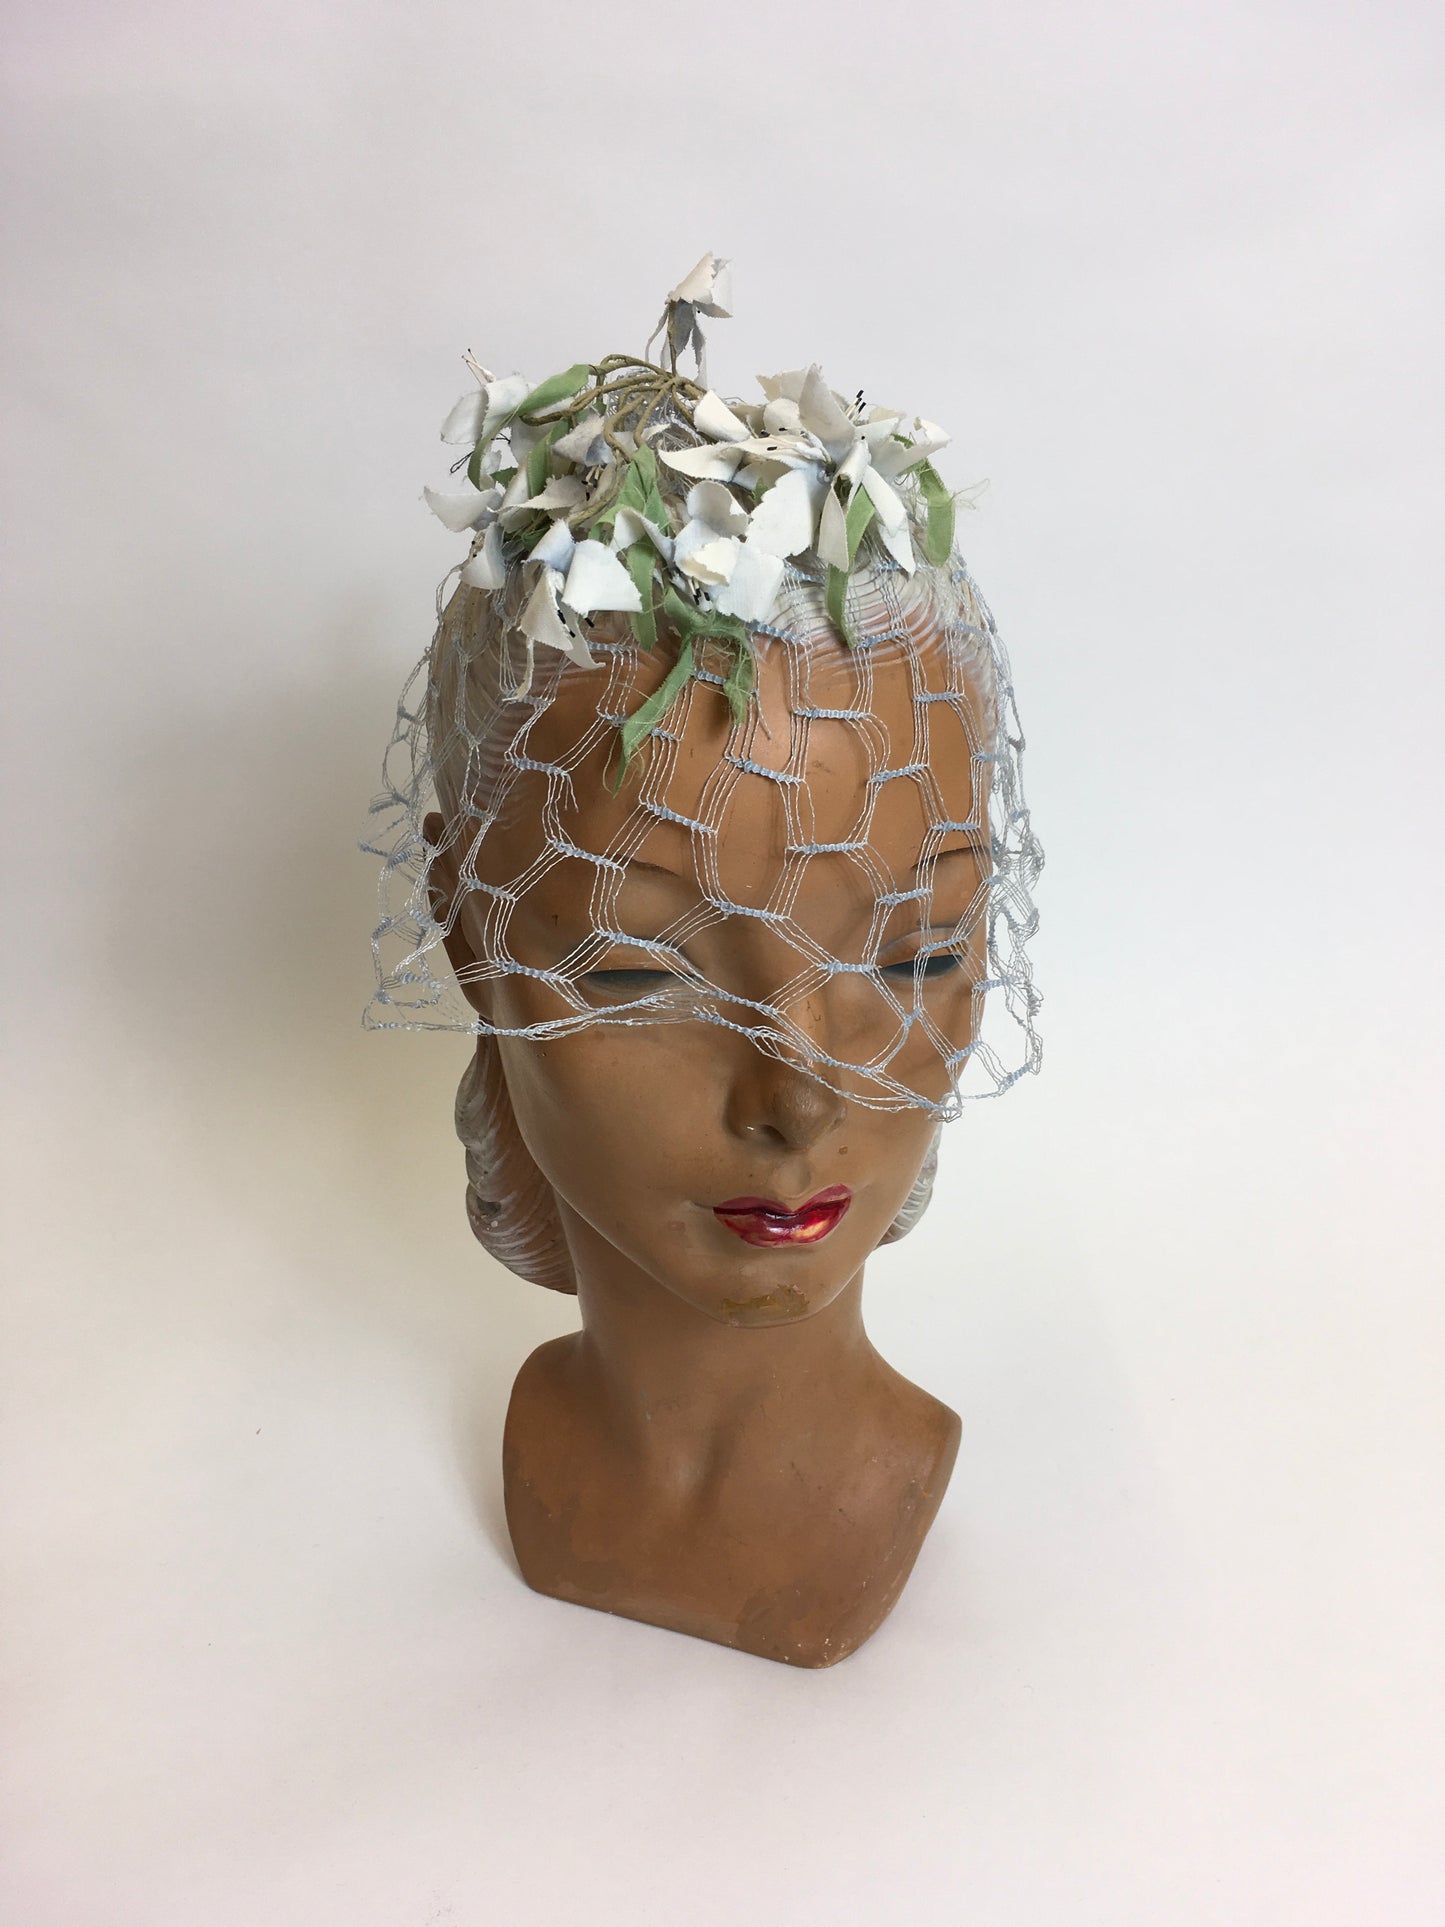 Original late 1940’s early 1950s Headpiece - Powder blue veiling adorned with ivory & green flowers